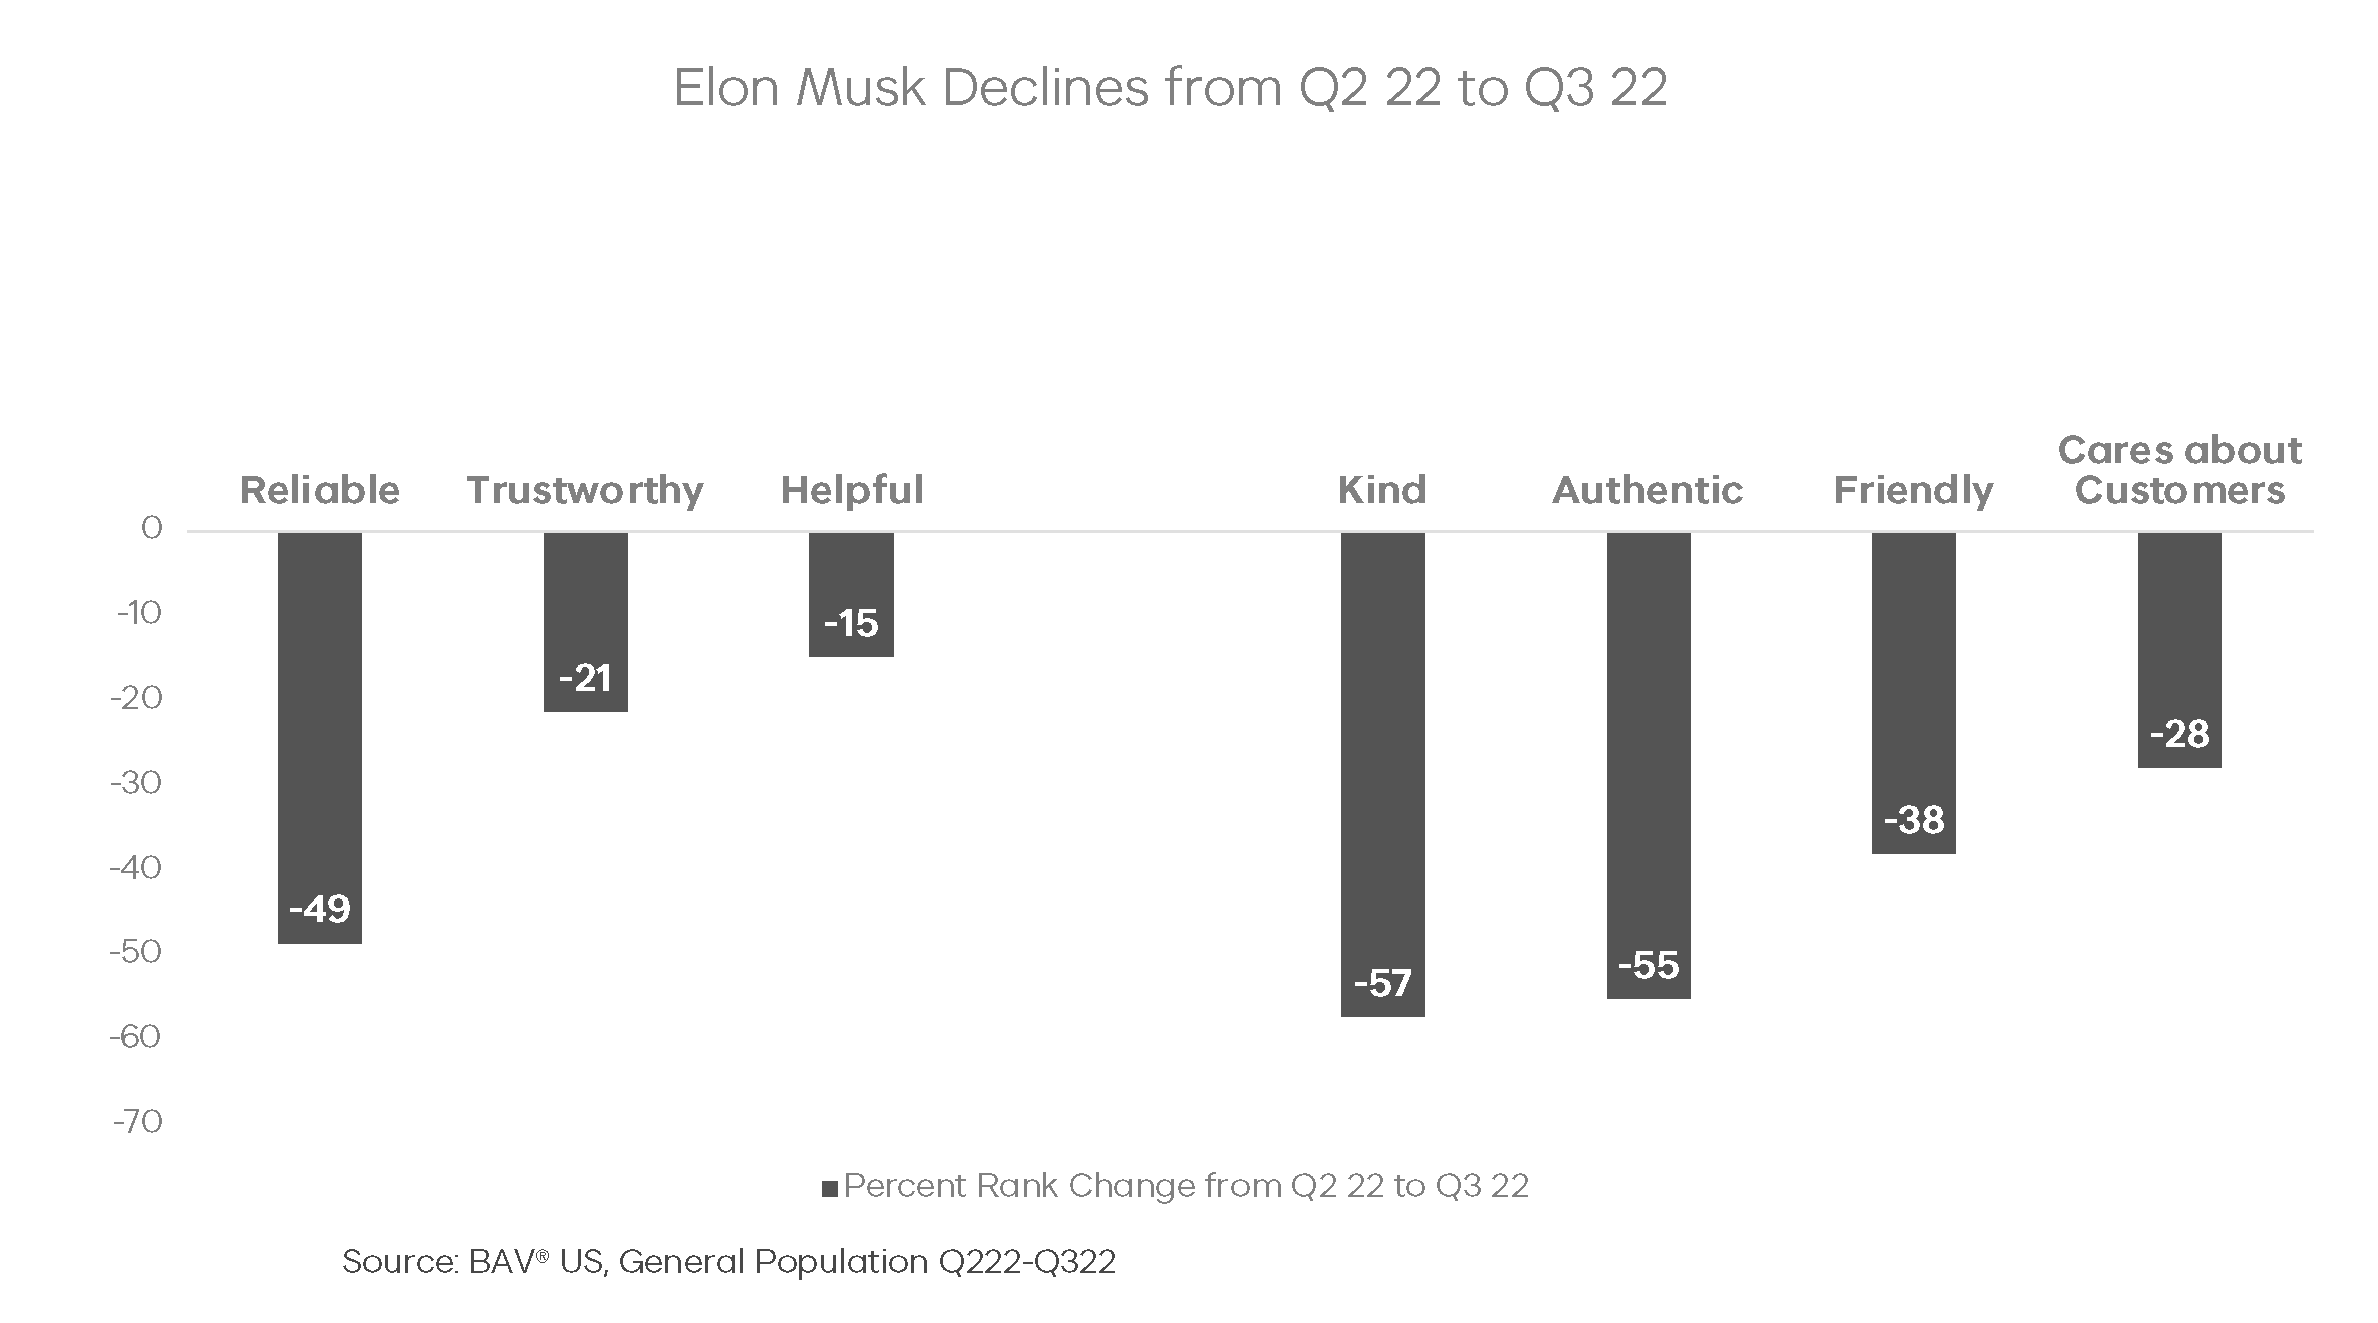 Chart illustrating decline in key imagery attributes for Elon's brand from Q2 2022 to Q3 2022